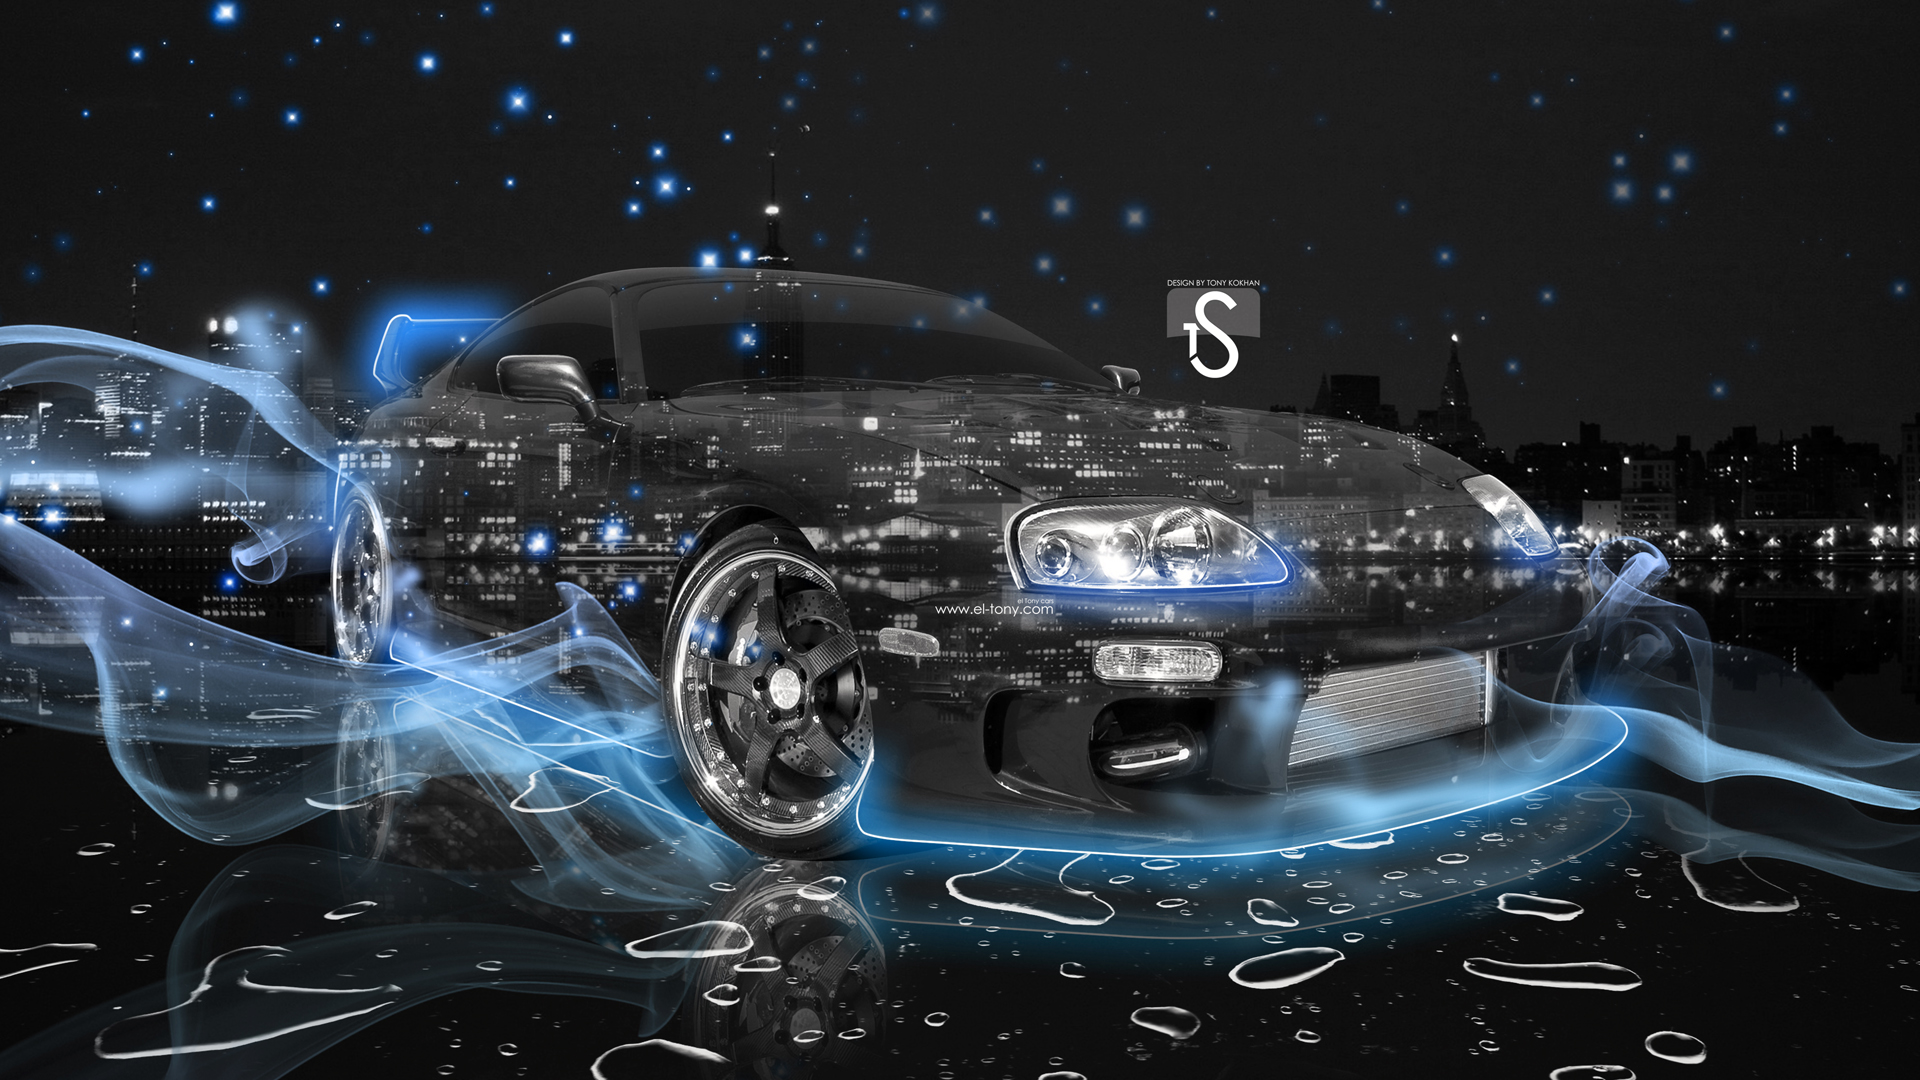 Free Download Toyota Supra City Light Exclusive Hd Wallpapers 391 19x1080 For Your Desktop Mobile Tablet Explore 45 Toyota Supra Iphone Wallpaper Custom Toyota Supra Wallpapers Toyota Supra Wallpaper